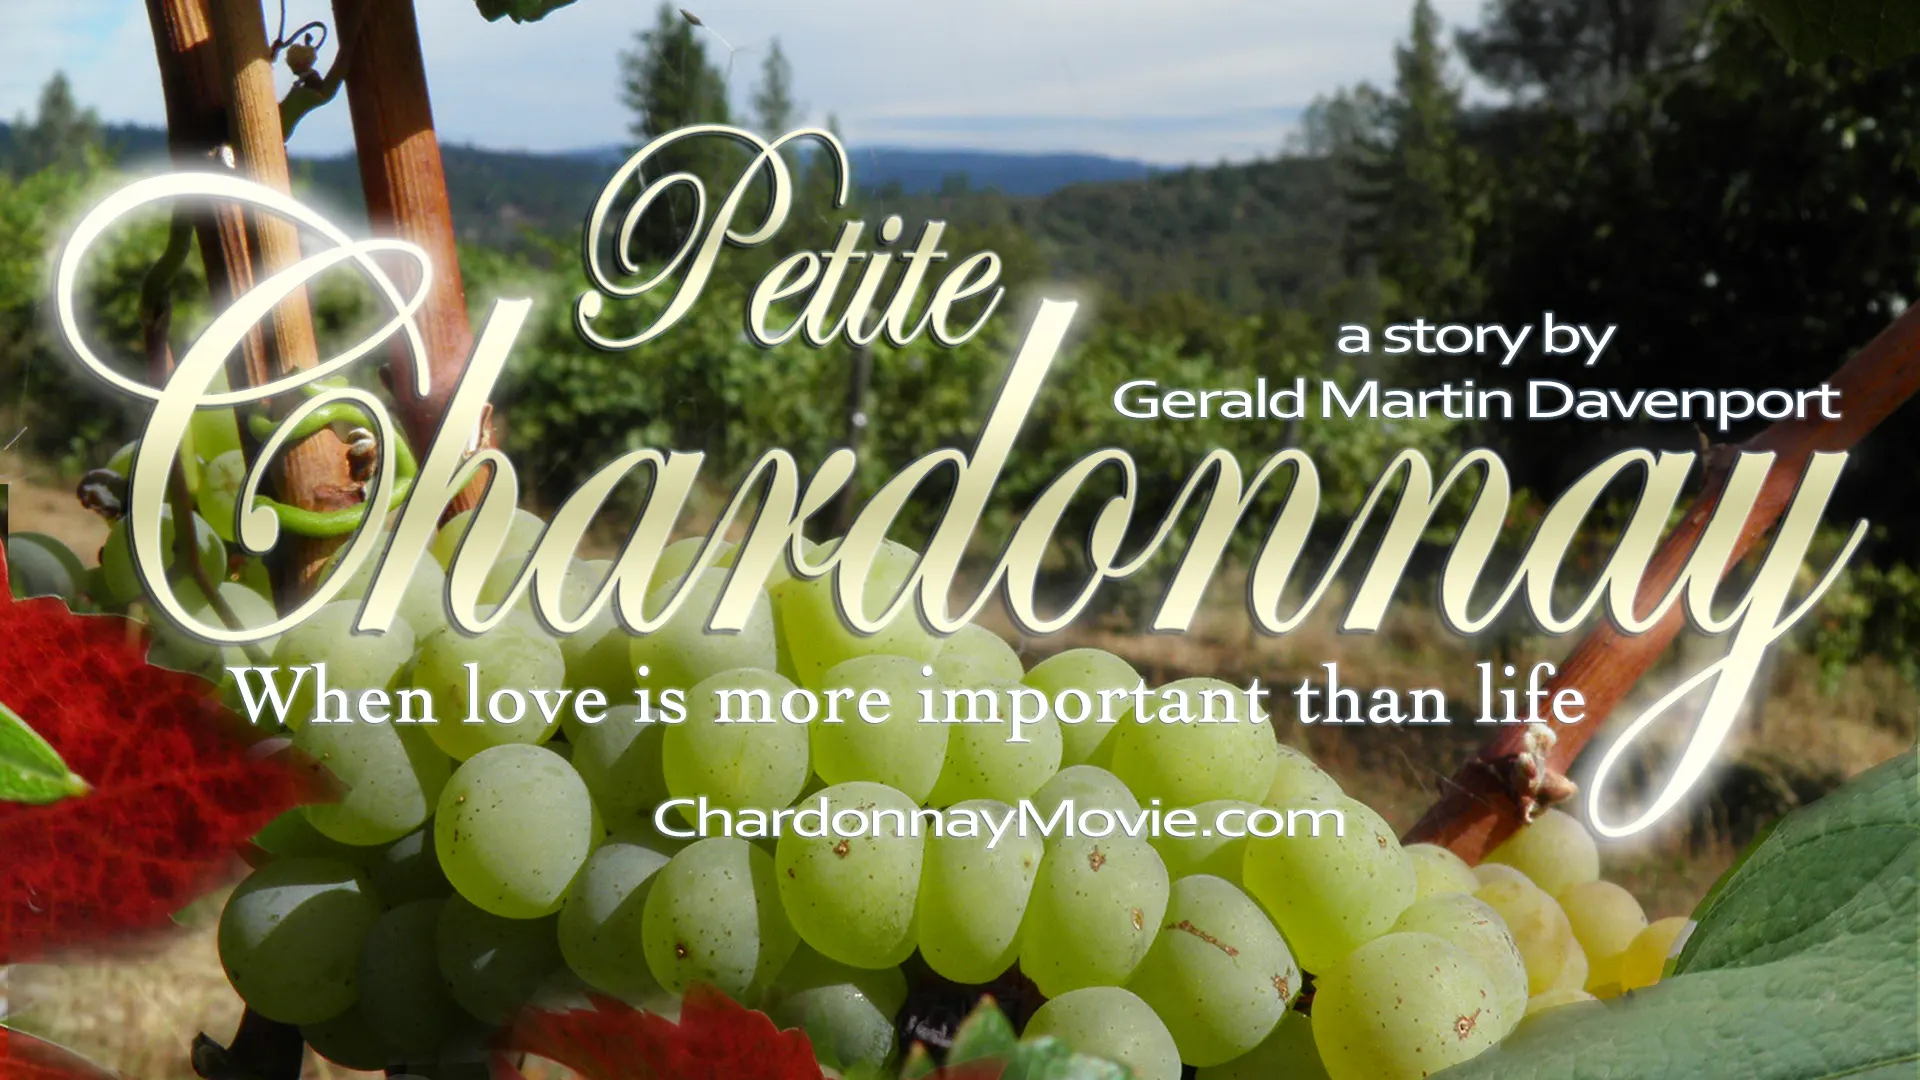 Petite Chardonnay (2012) poster sheet - a story by Gerald Martin Davenport - When love is more important than life